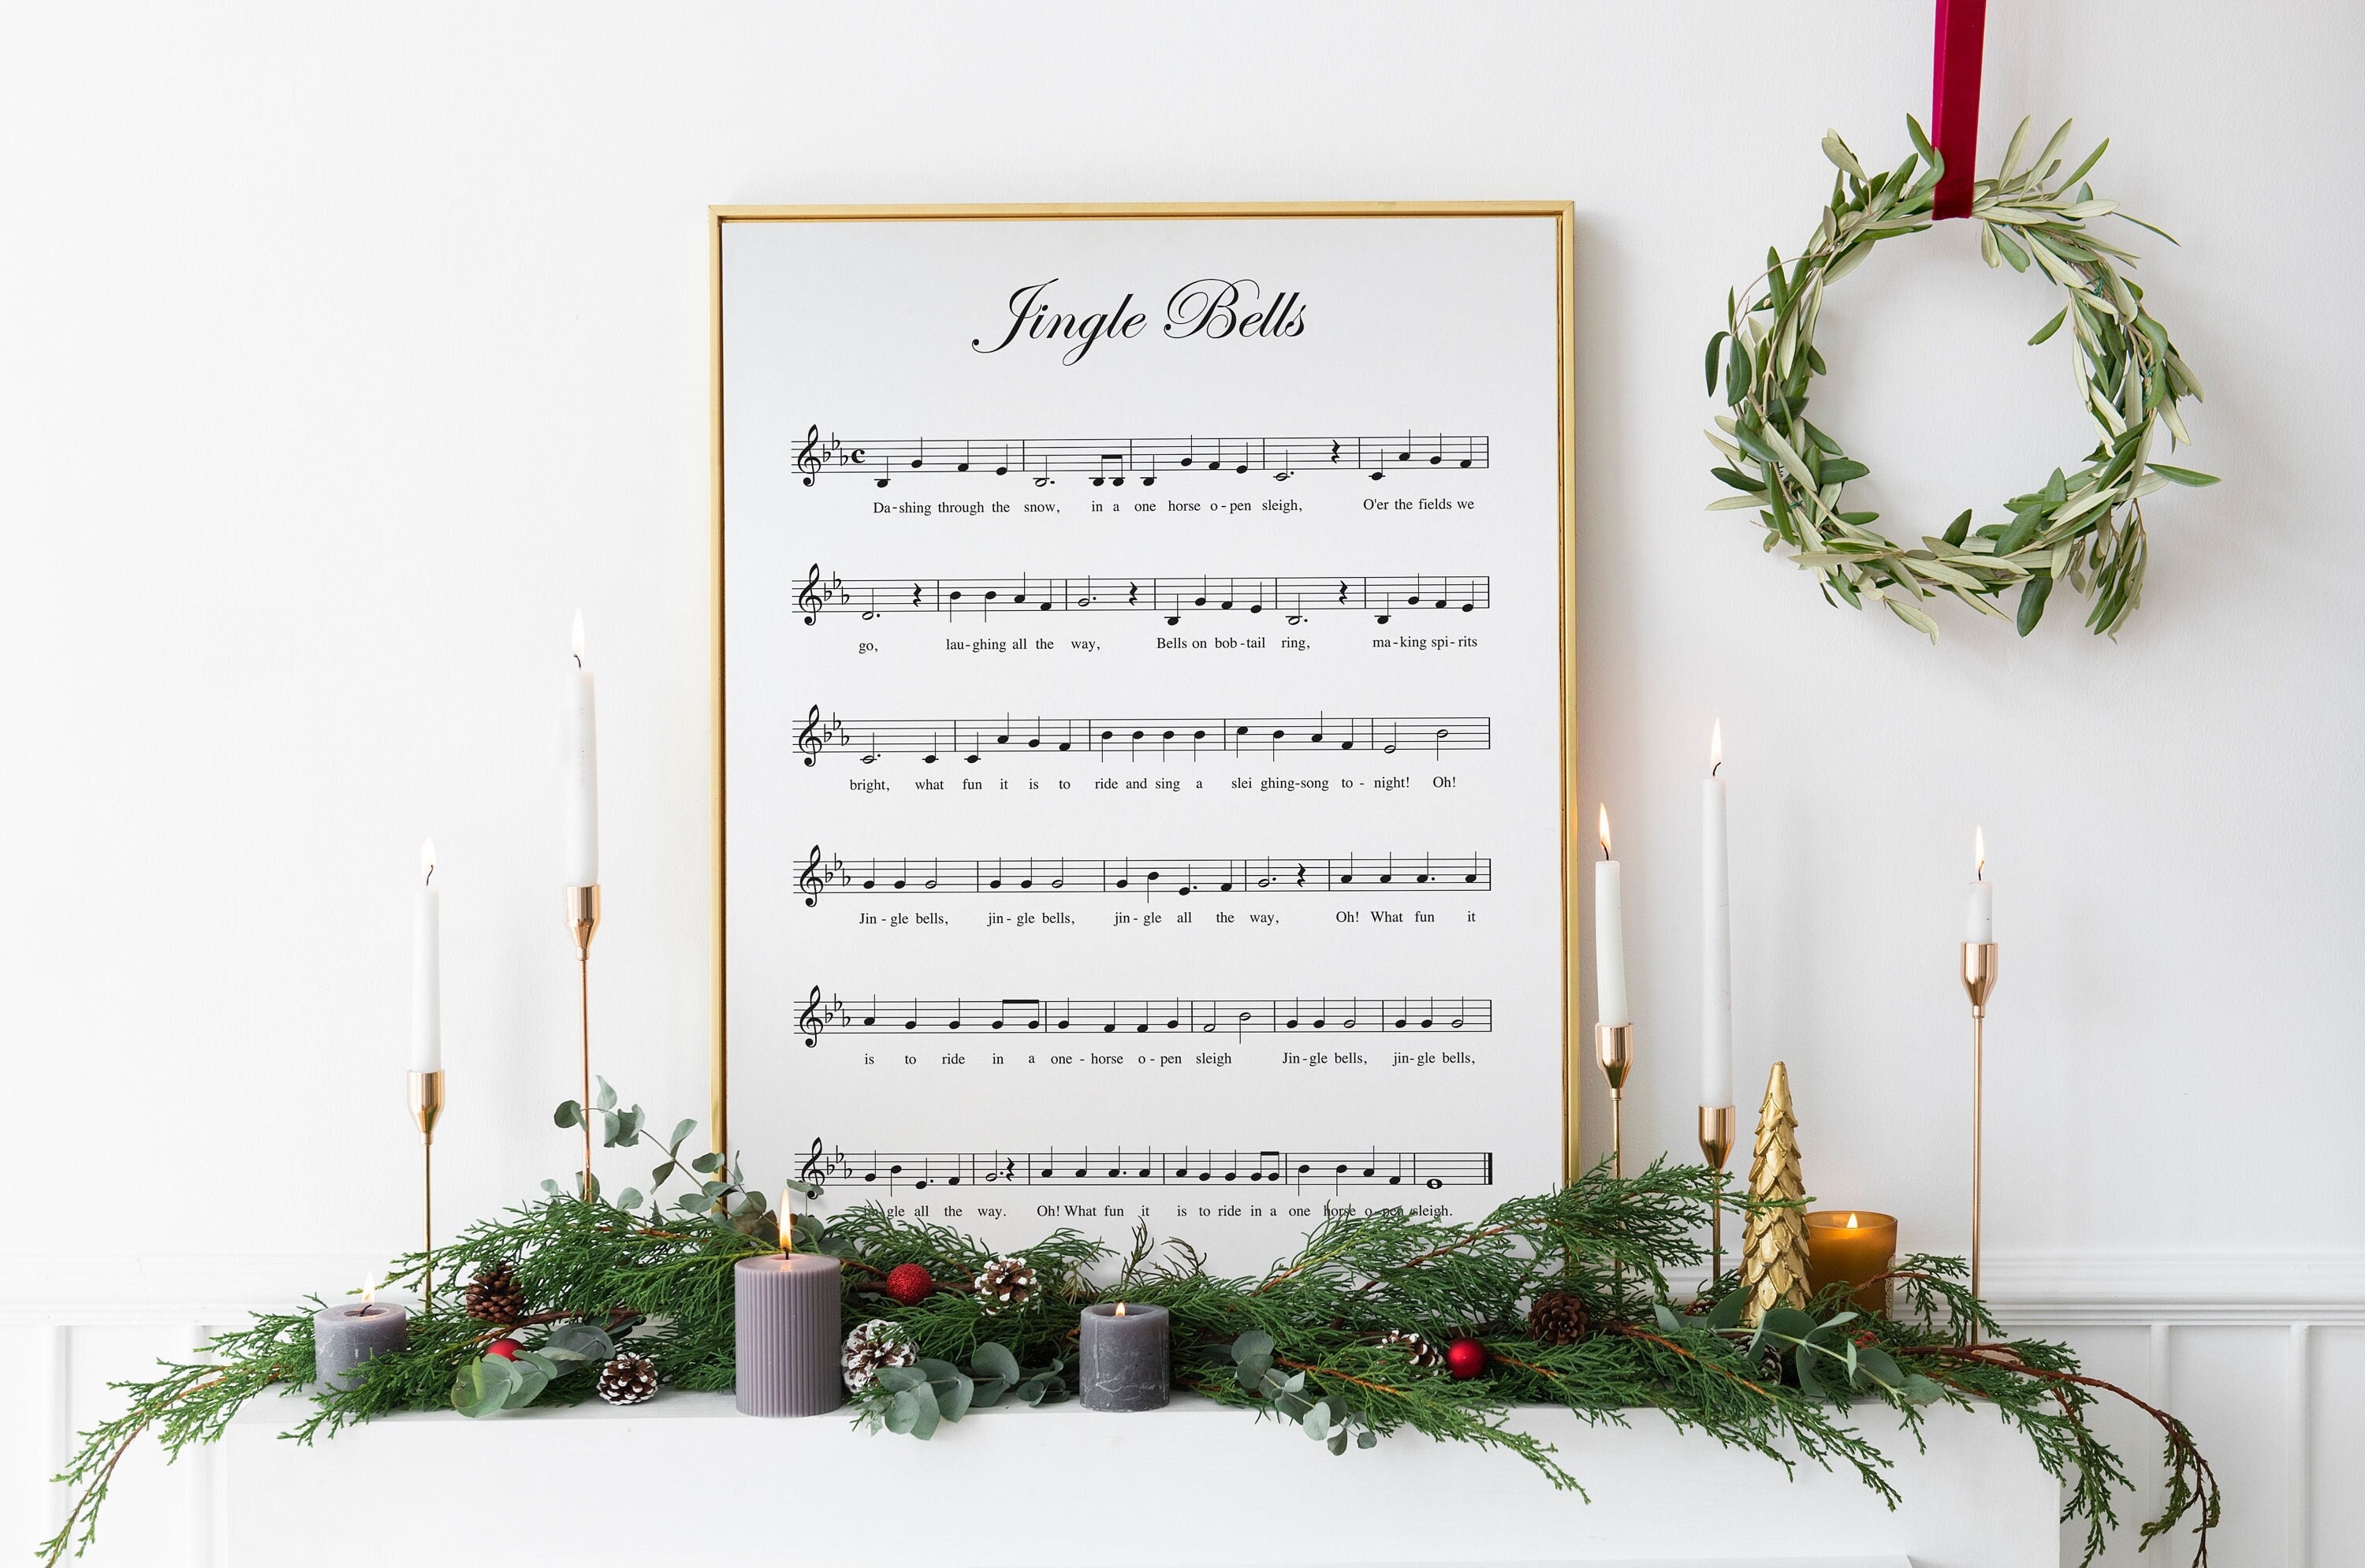 Jingle Bells-Jingle All the Way Christmas Song Wall Art Print, This Ready  to Frame Typographic Holiday Music Wall Art Poster is Good For Home